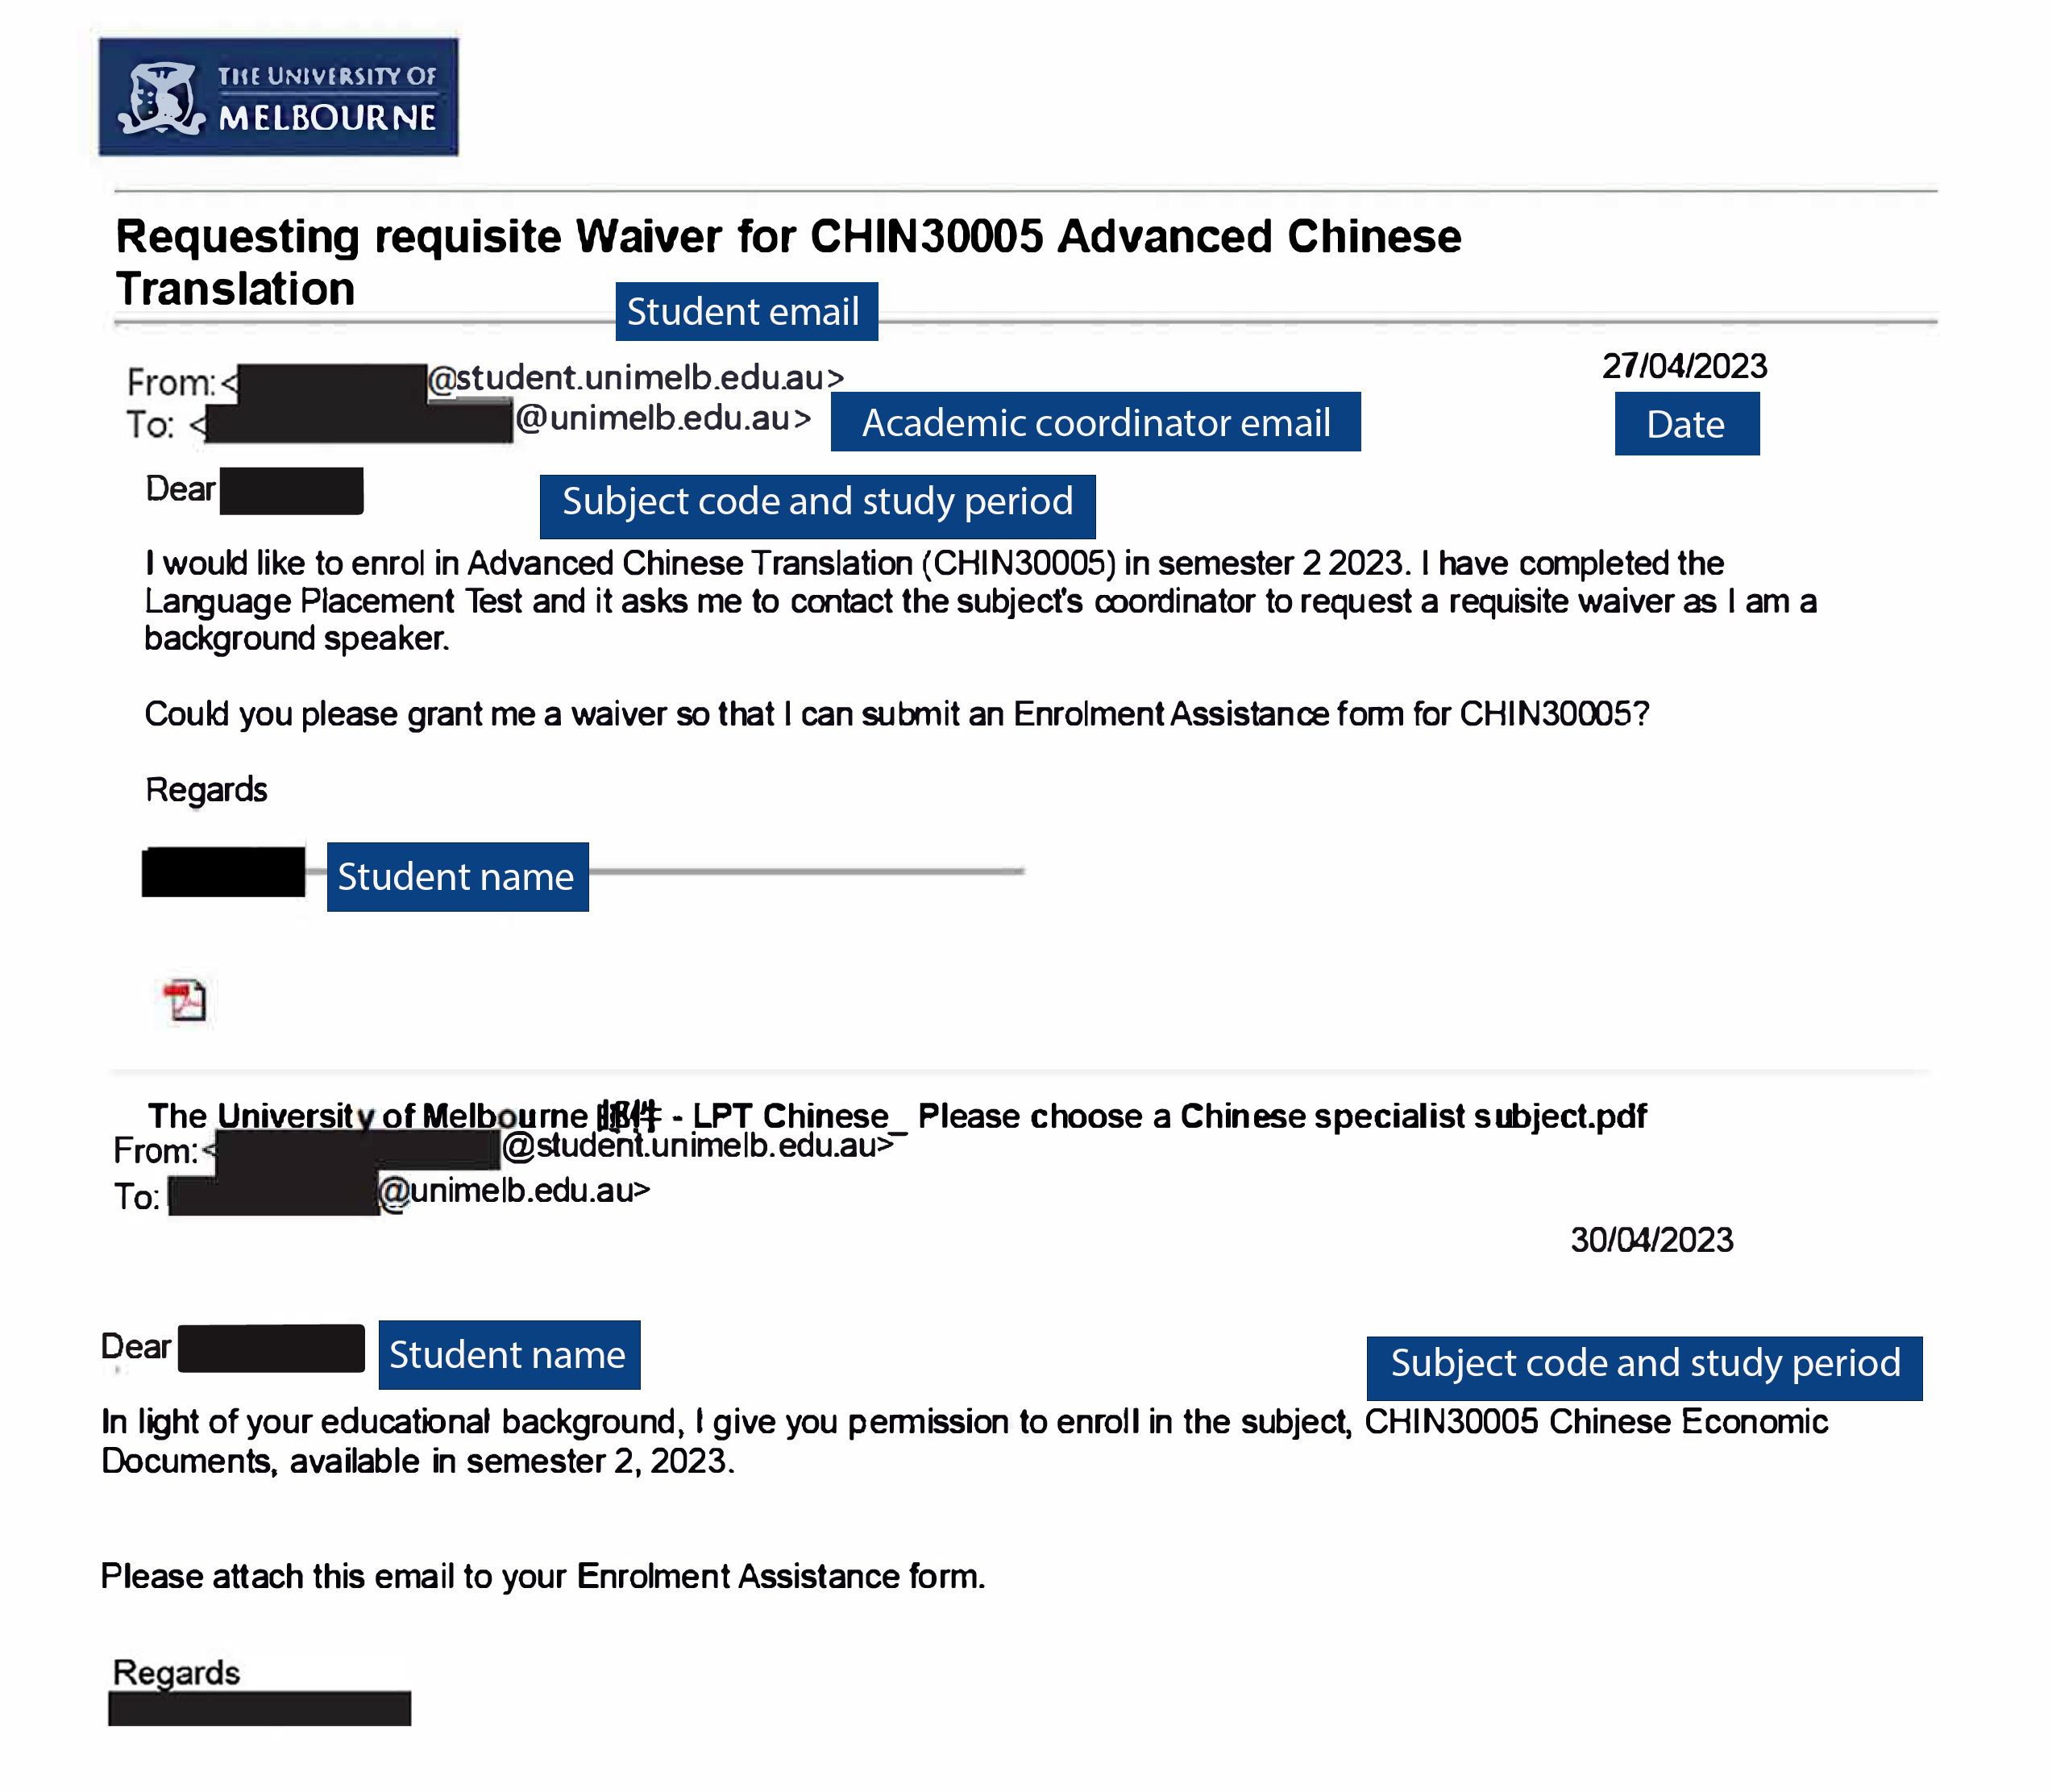 An email showing an Academic Coordinator providing a requisite waiver approval for a student.